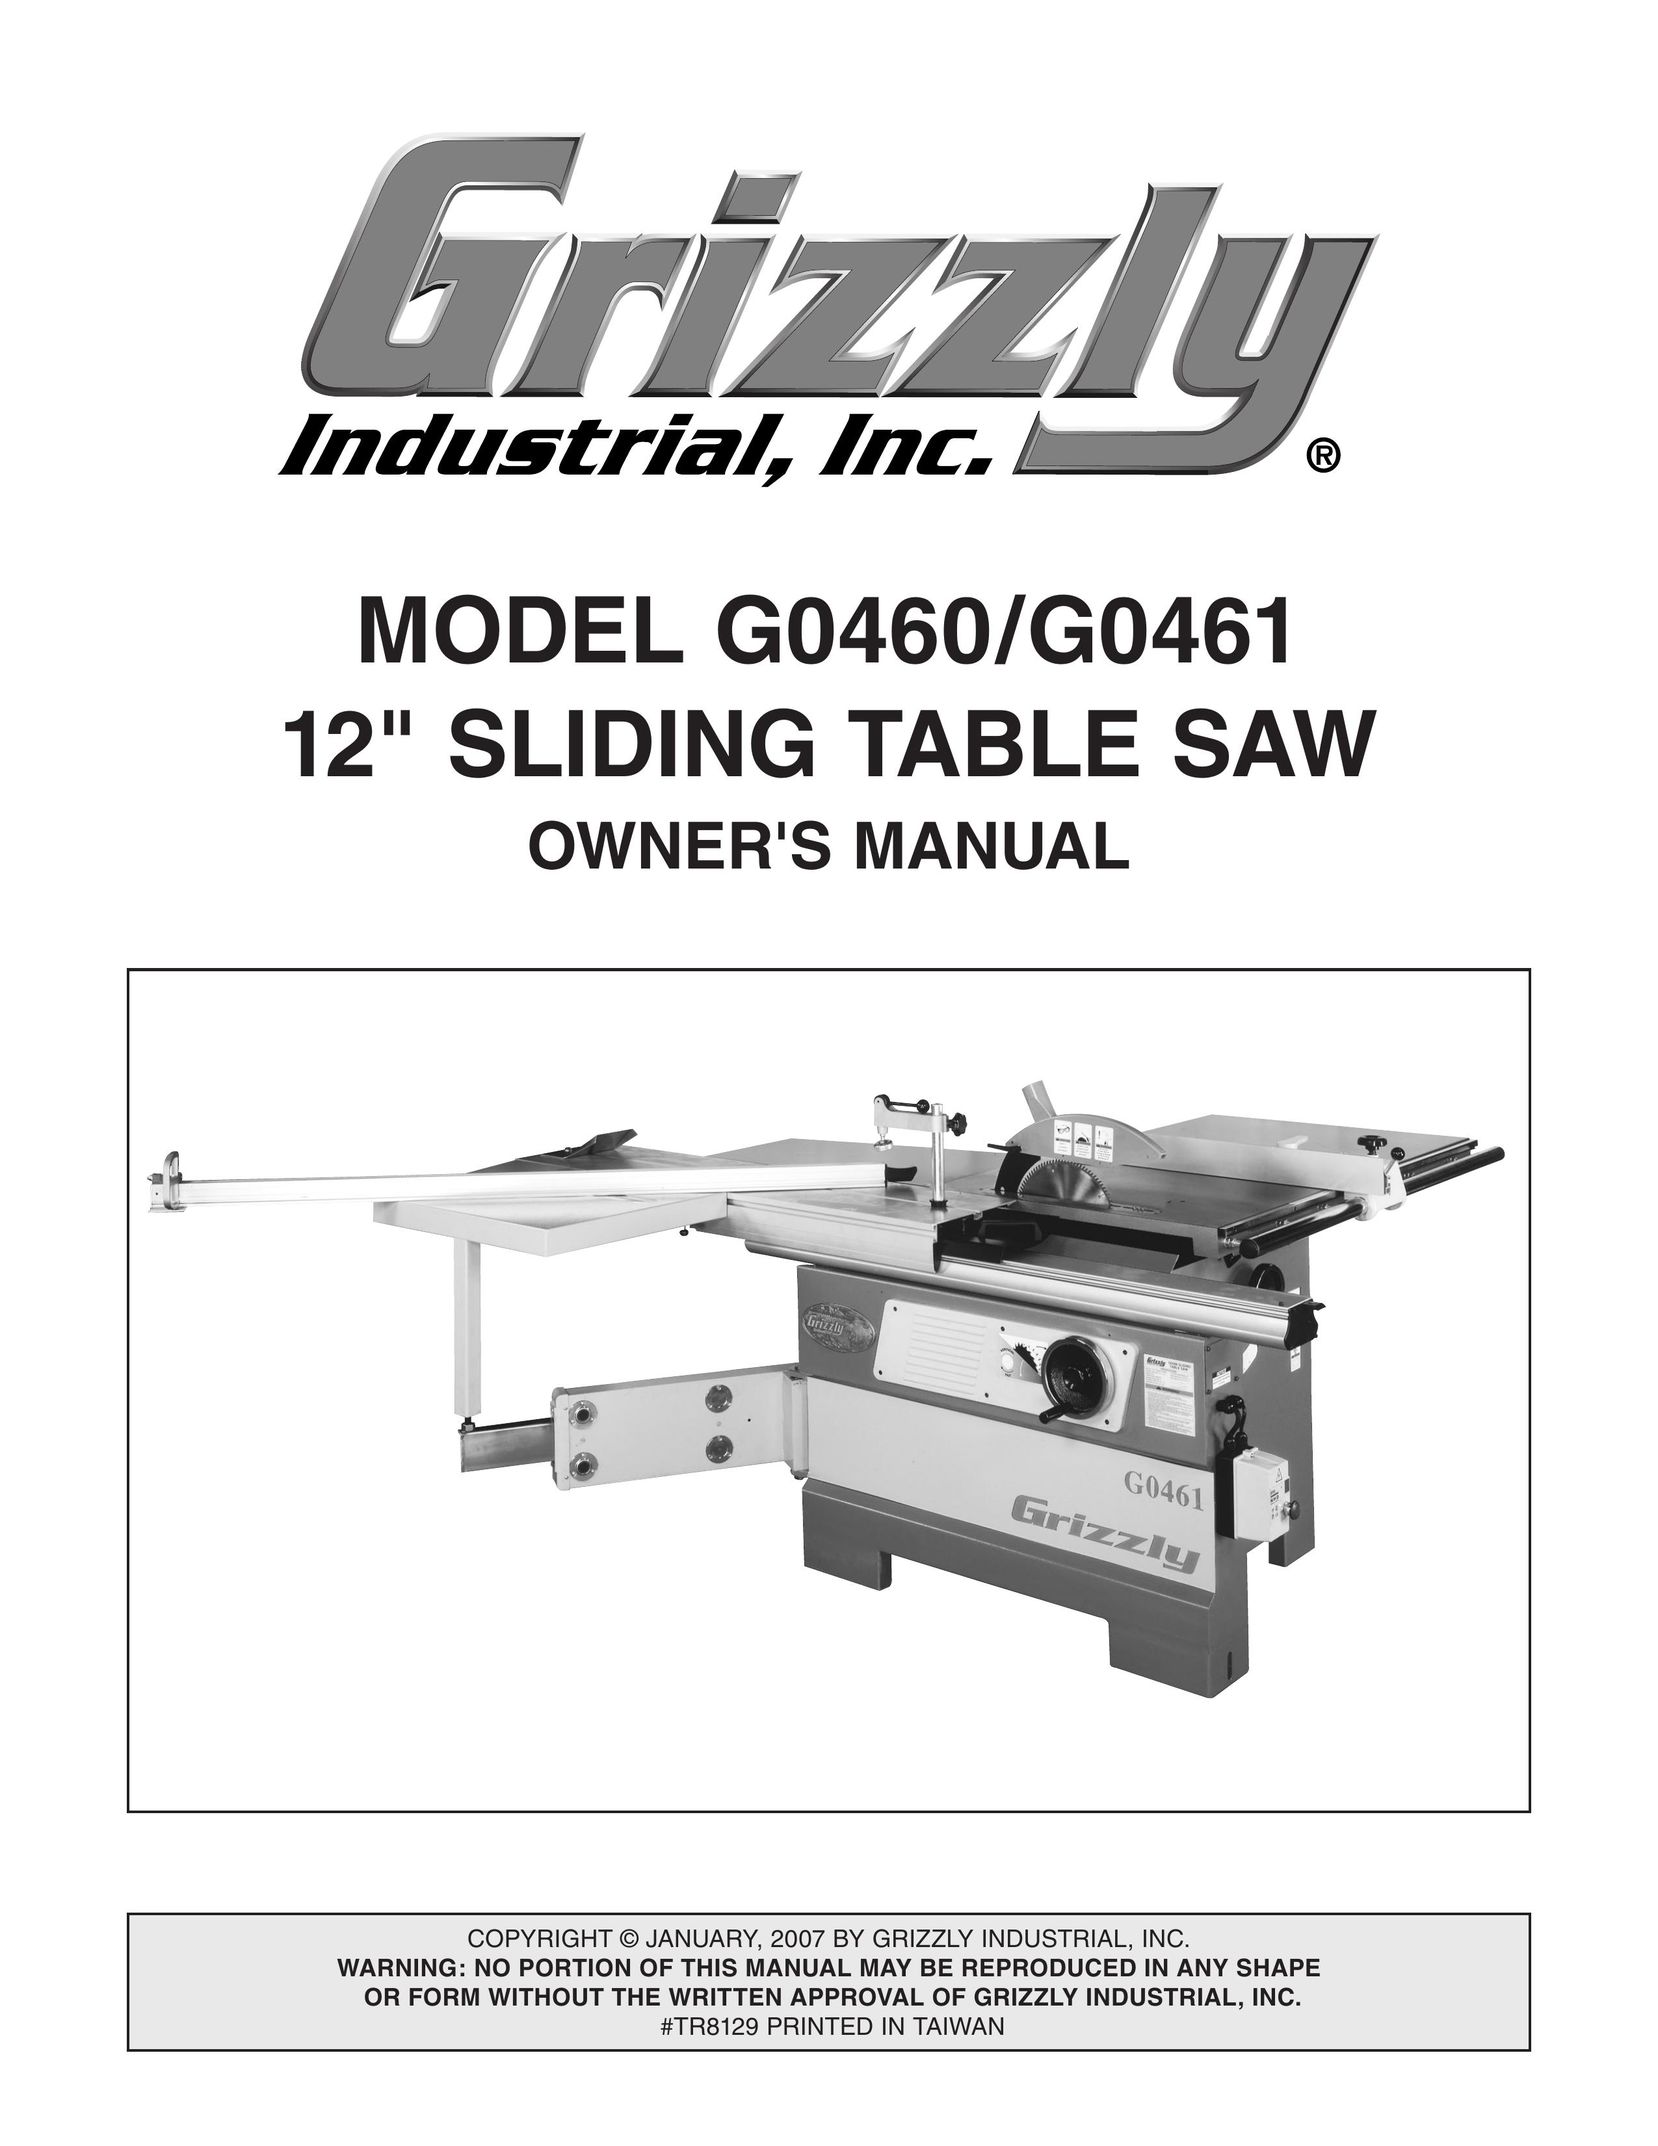 Grizzly G0461 Saw User Manual